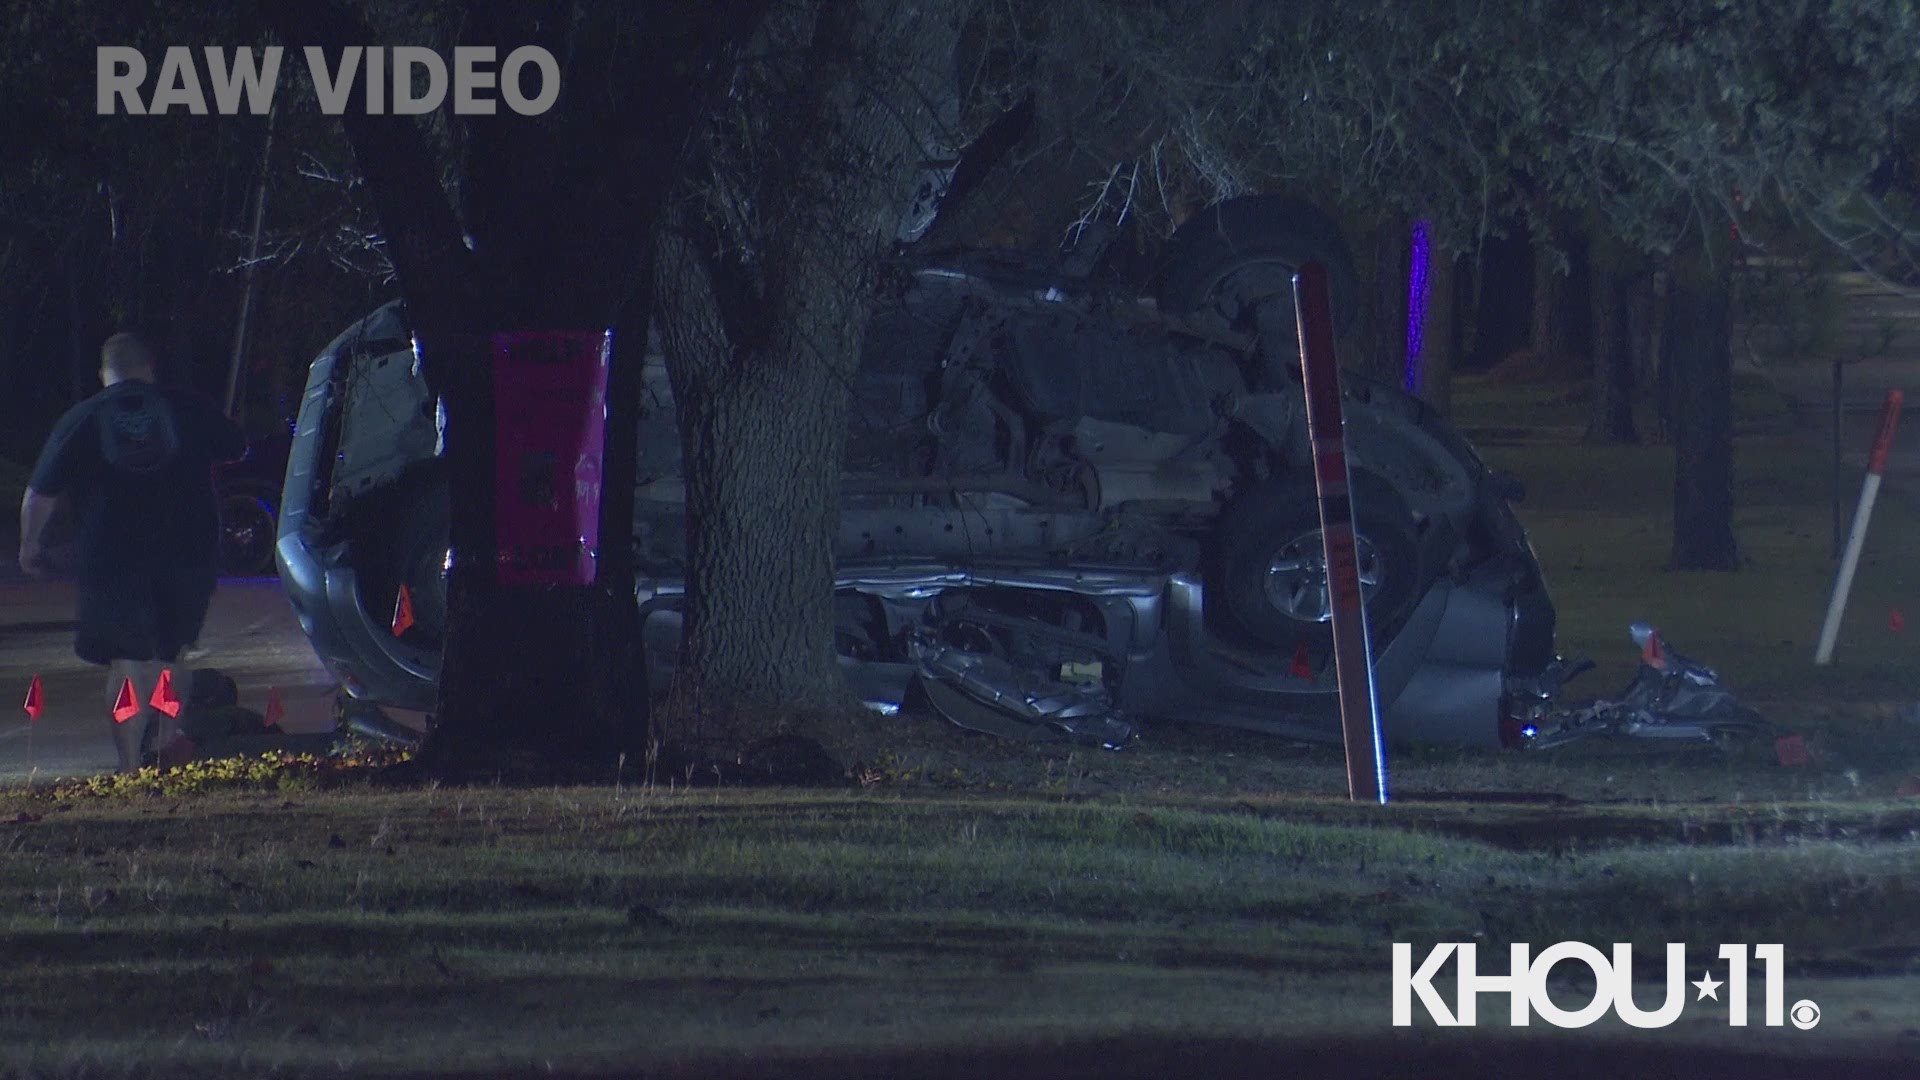 Houston police investigating a deadly overnight crash Thanksgiving that left one person dead and three other hospitalized in critical condition.